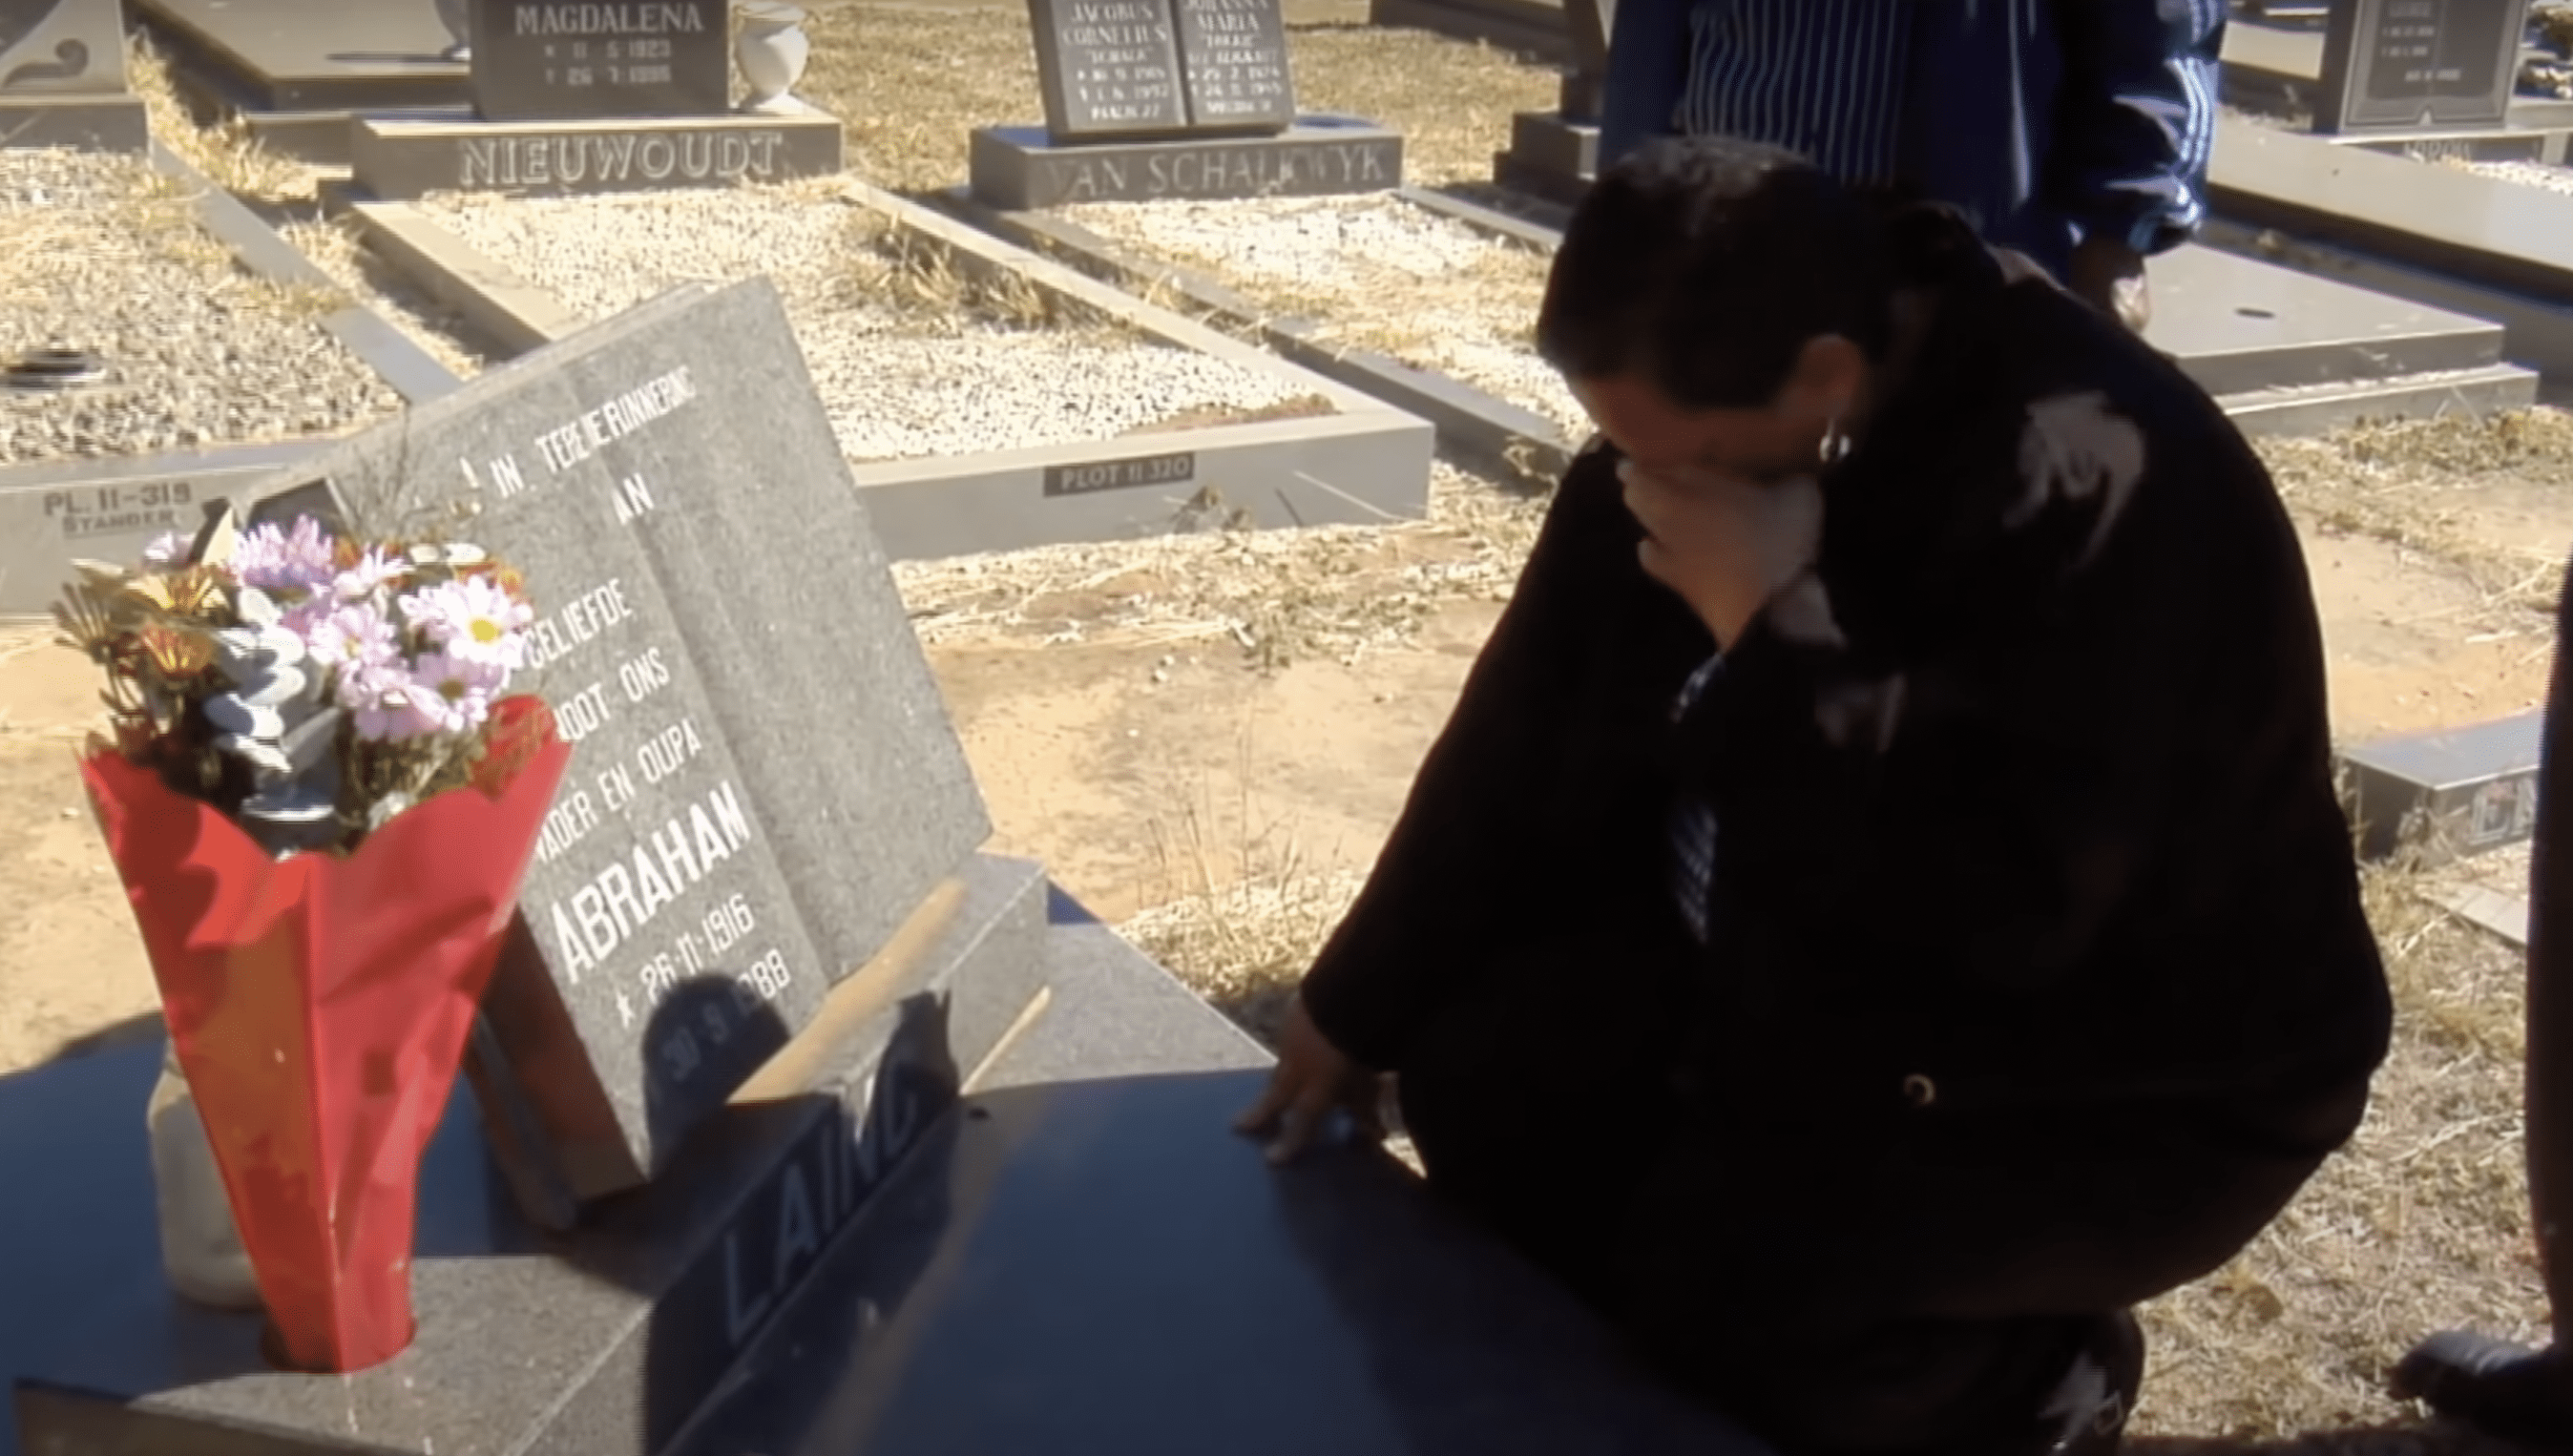 Sandra breaks down at her father's grave. | Source: YouTube.com/Our Life